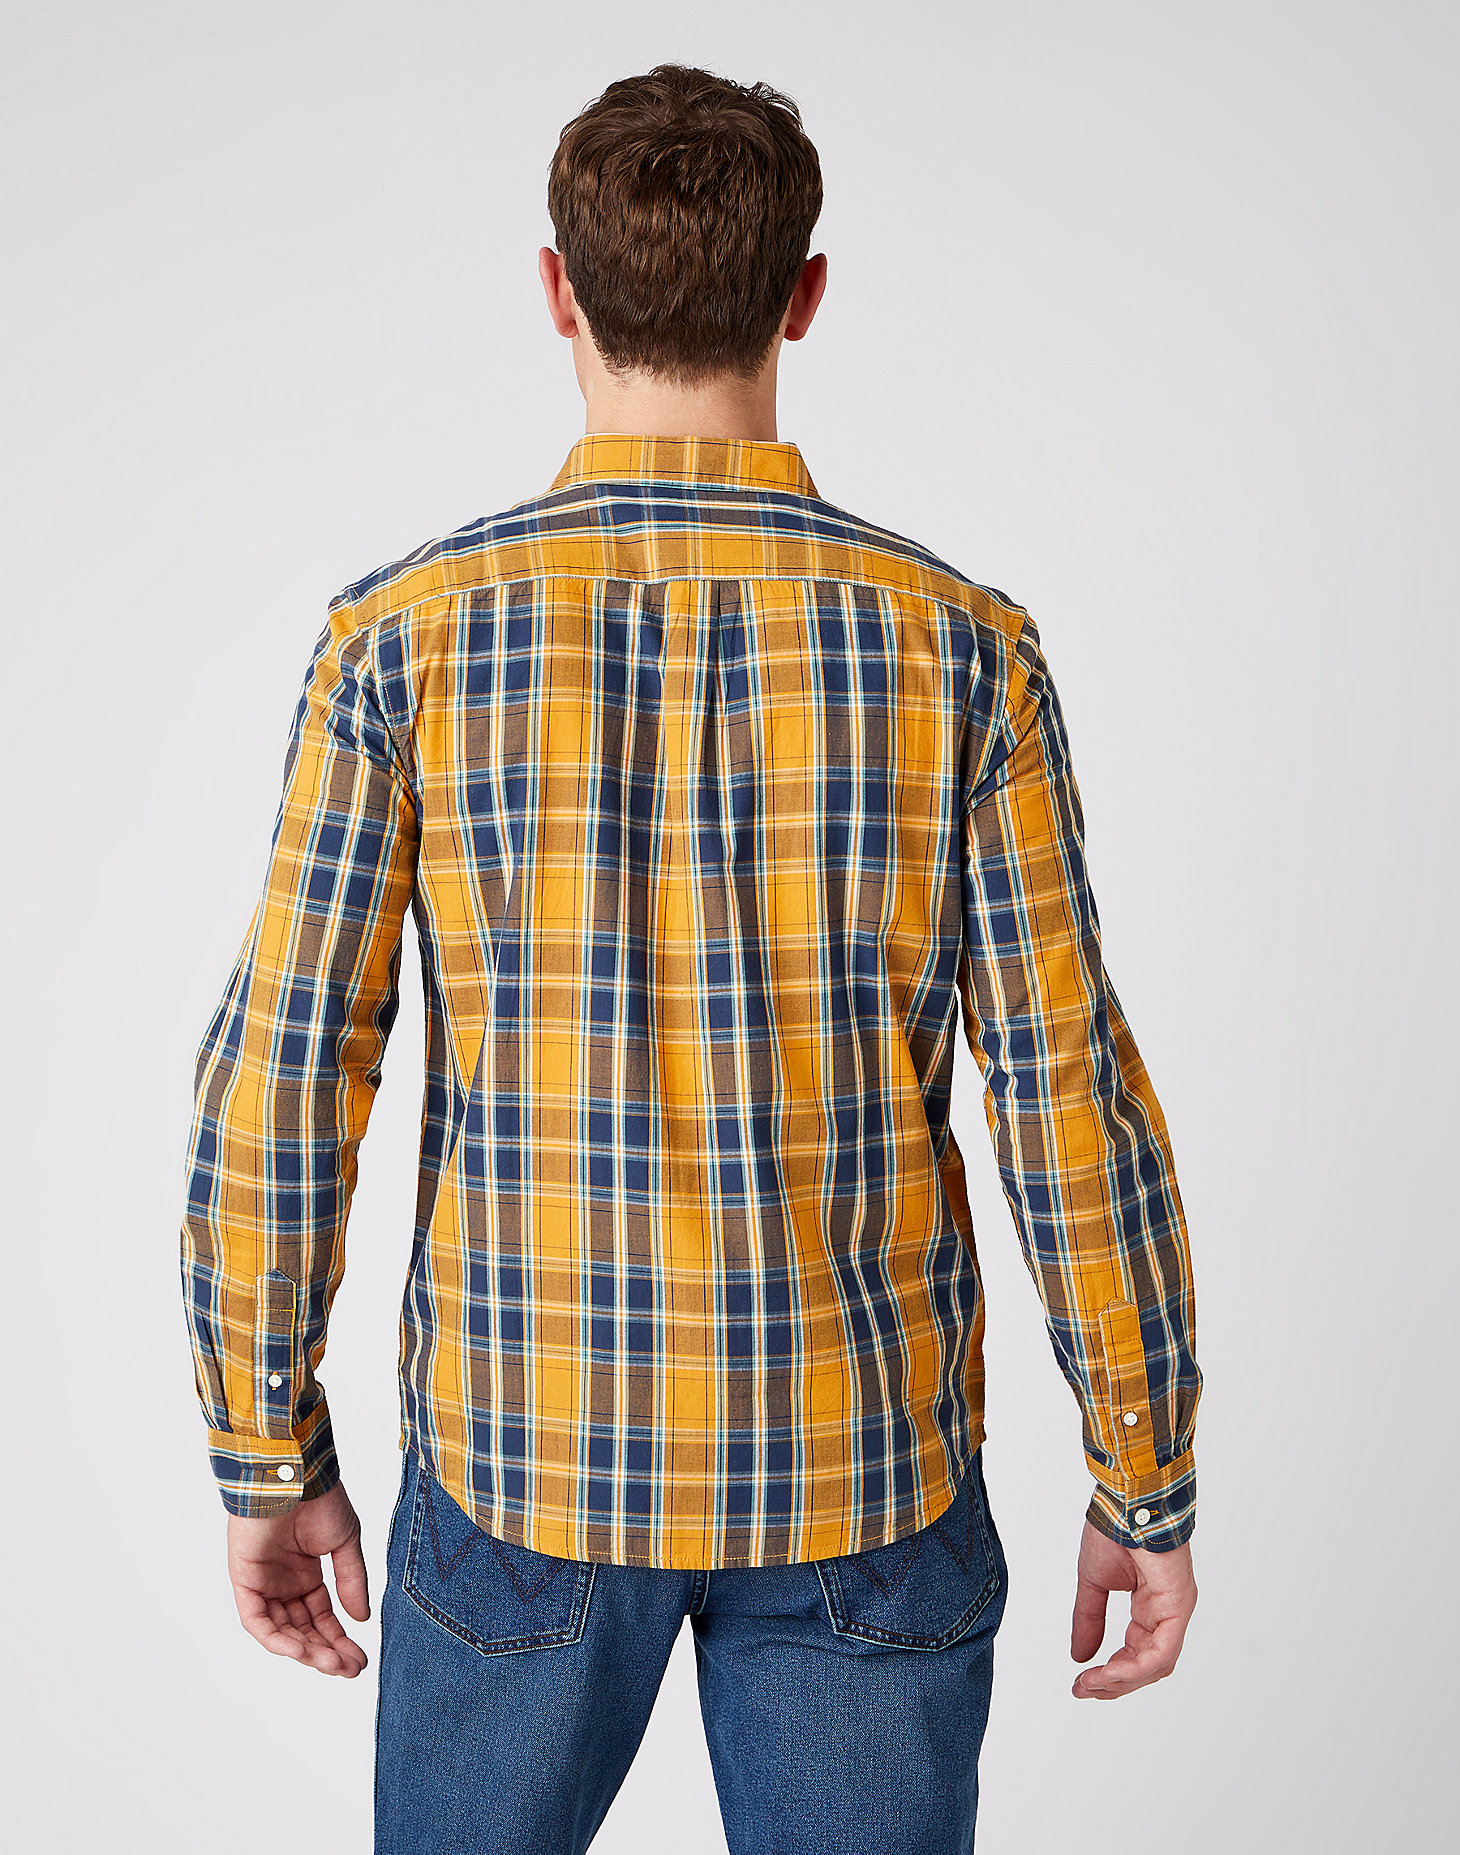 One Pocket Shirt in Inca Gold alternative view 2